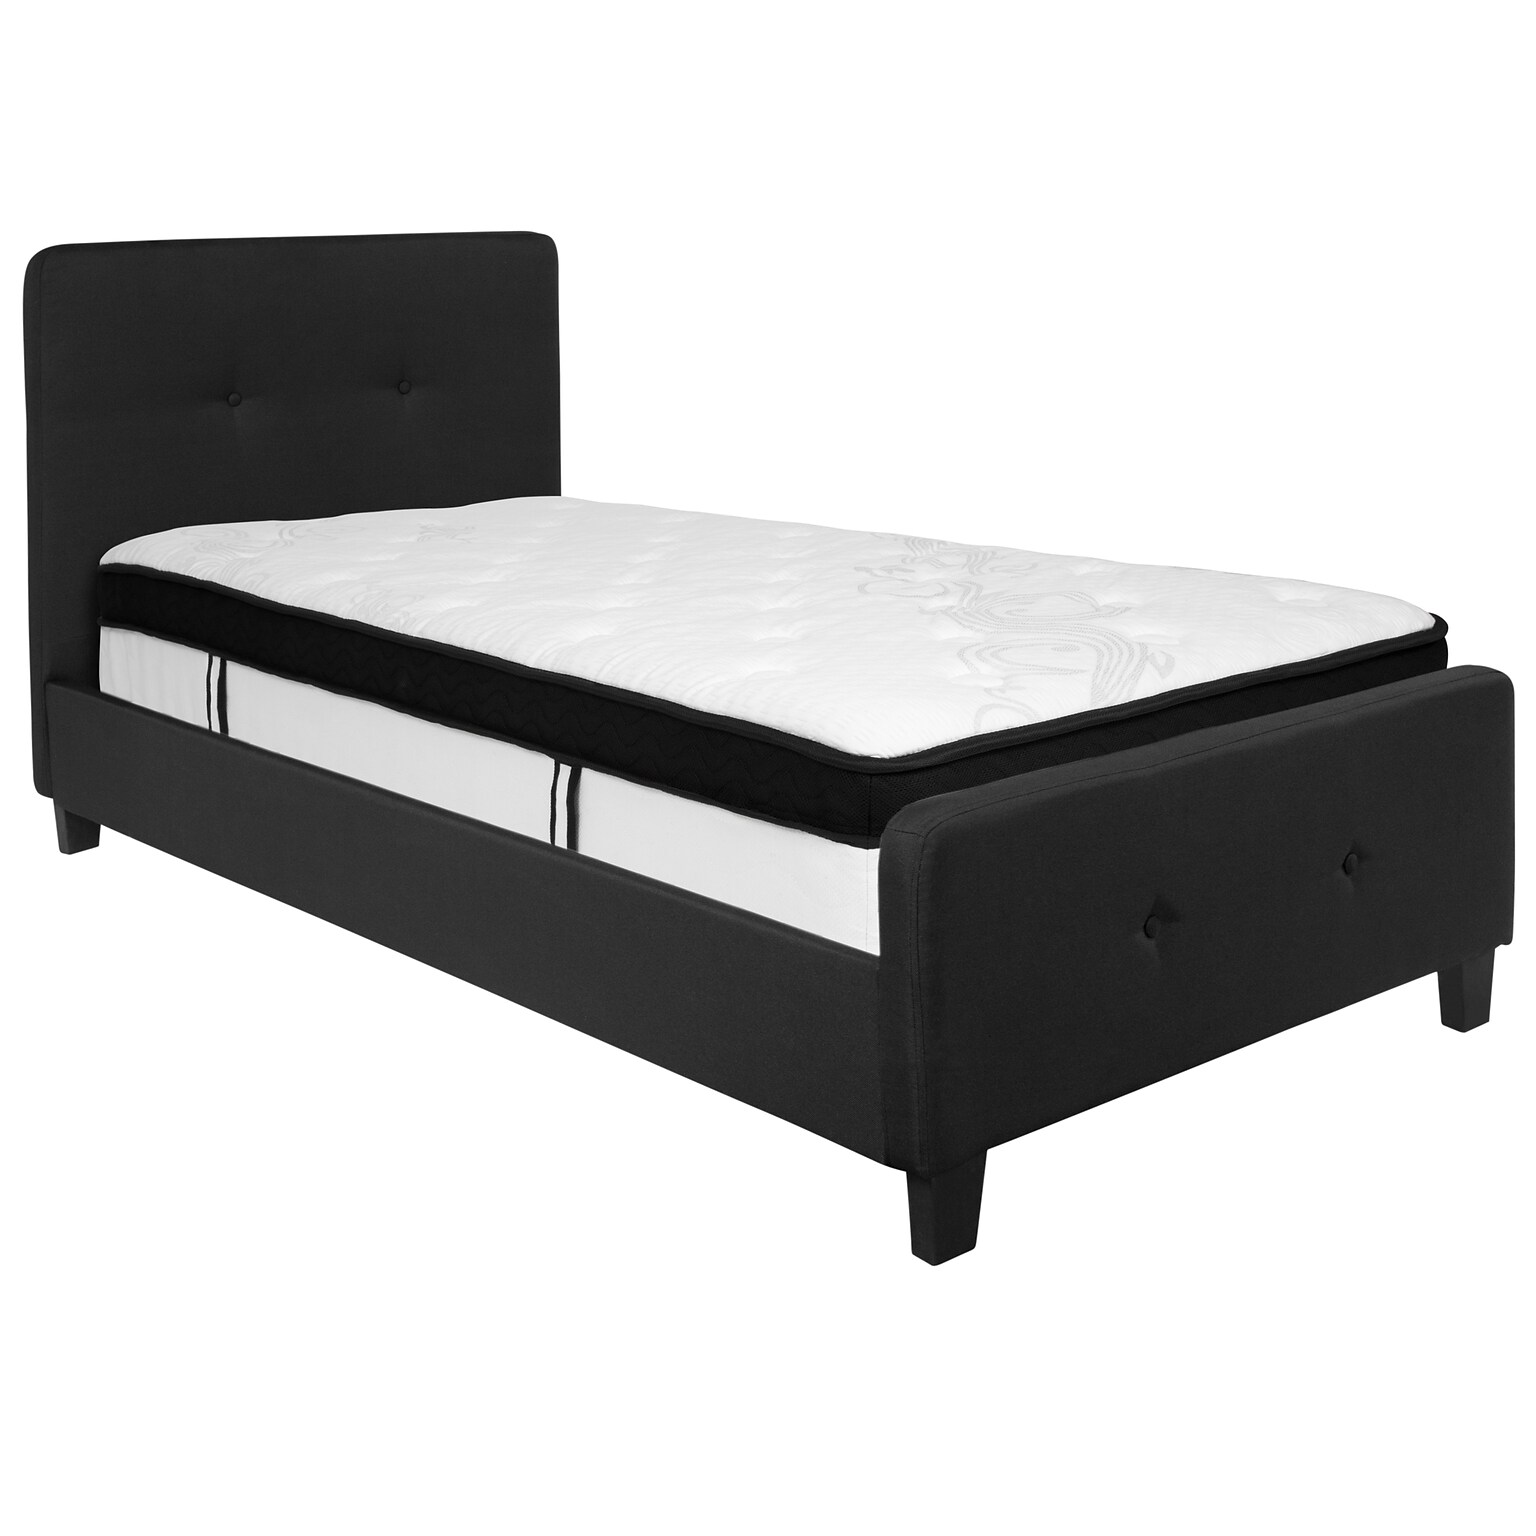 Flash Furniture Tribeca Tufted Upholstered Platform Bed in Black Fabric with Memory Foam Mattress, Twin (HGBMF21)